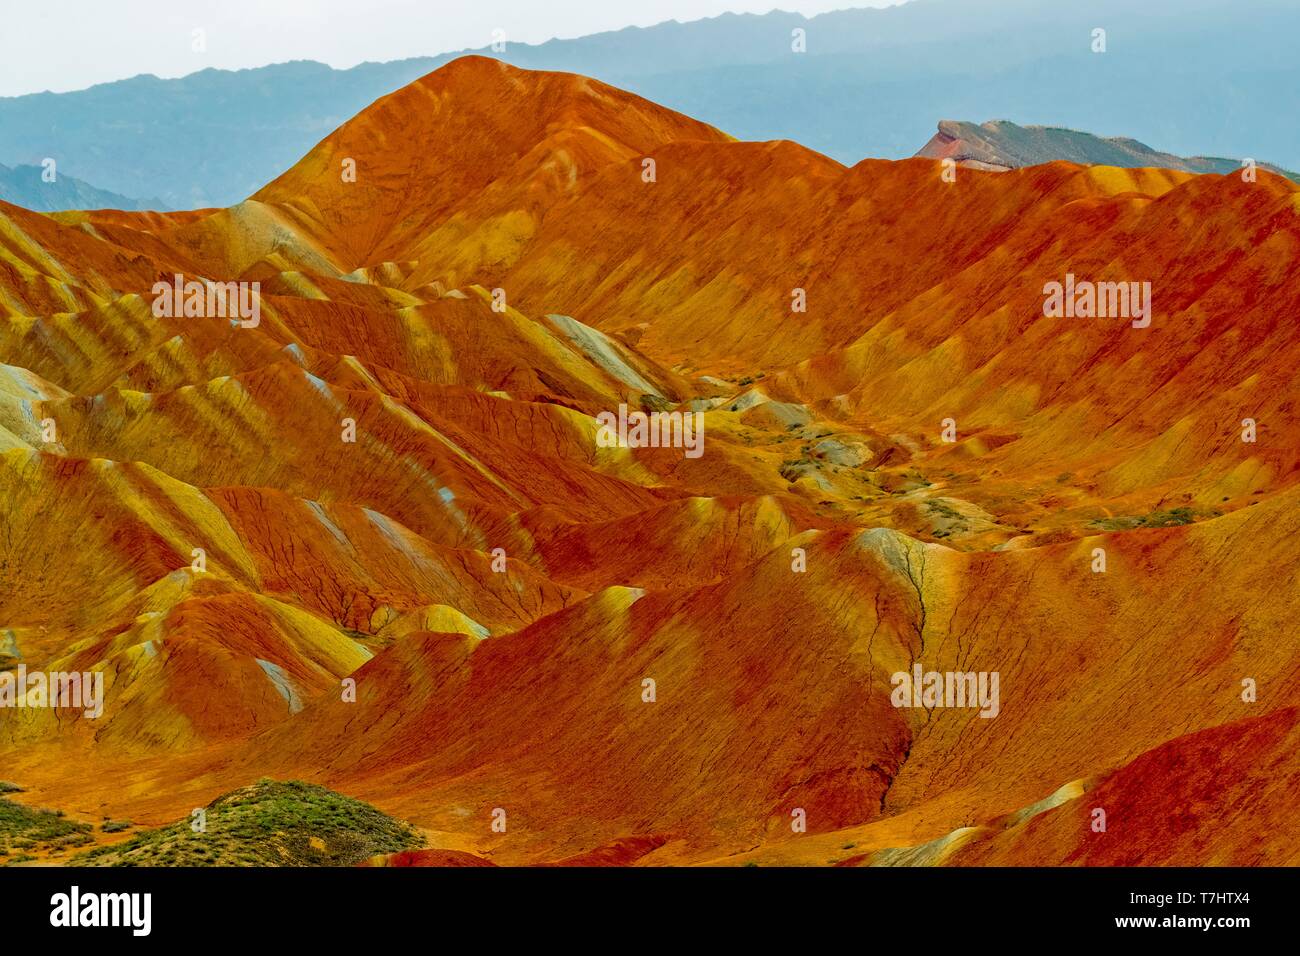 Eroded hills of sedimentary conglomerate and sandstone, listed as World Heritage by UNESCO, Zhangye, China Stock Photo